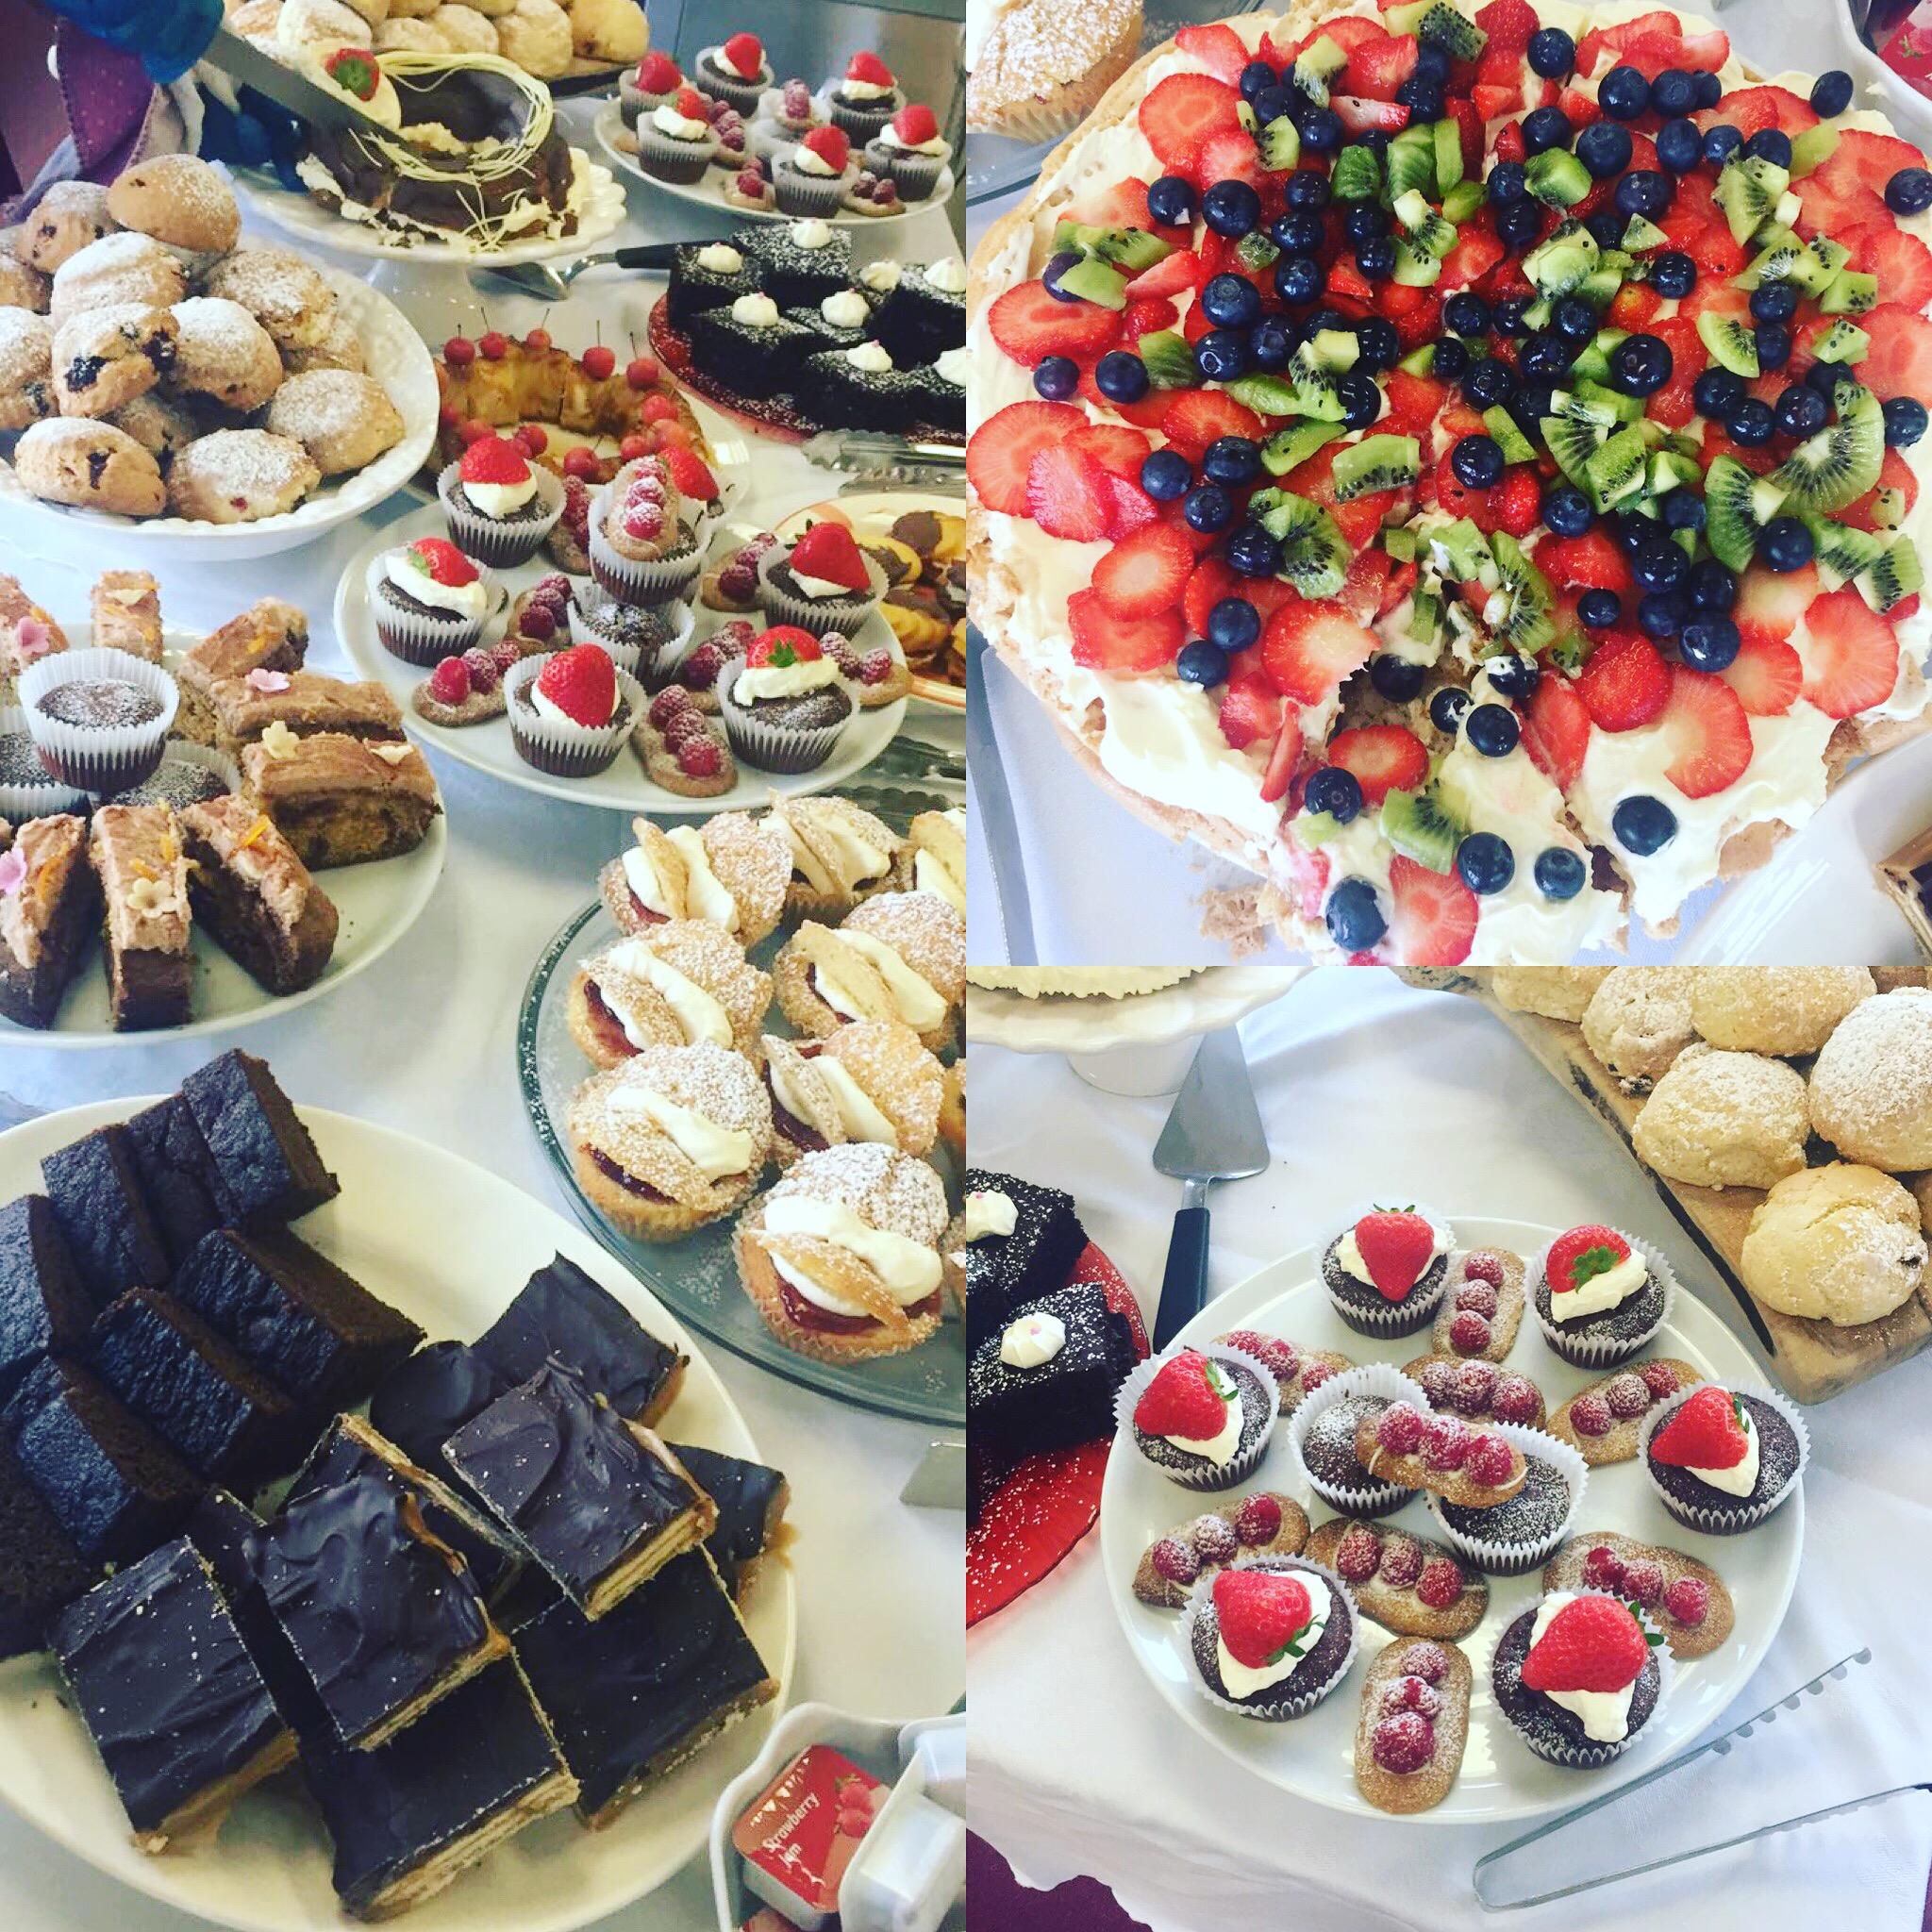 Q Bake Off In Aid Of Cystic Fibrosis Ireland